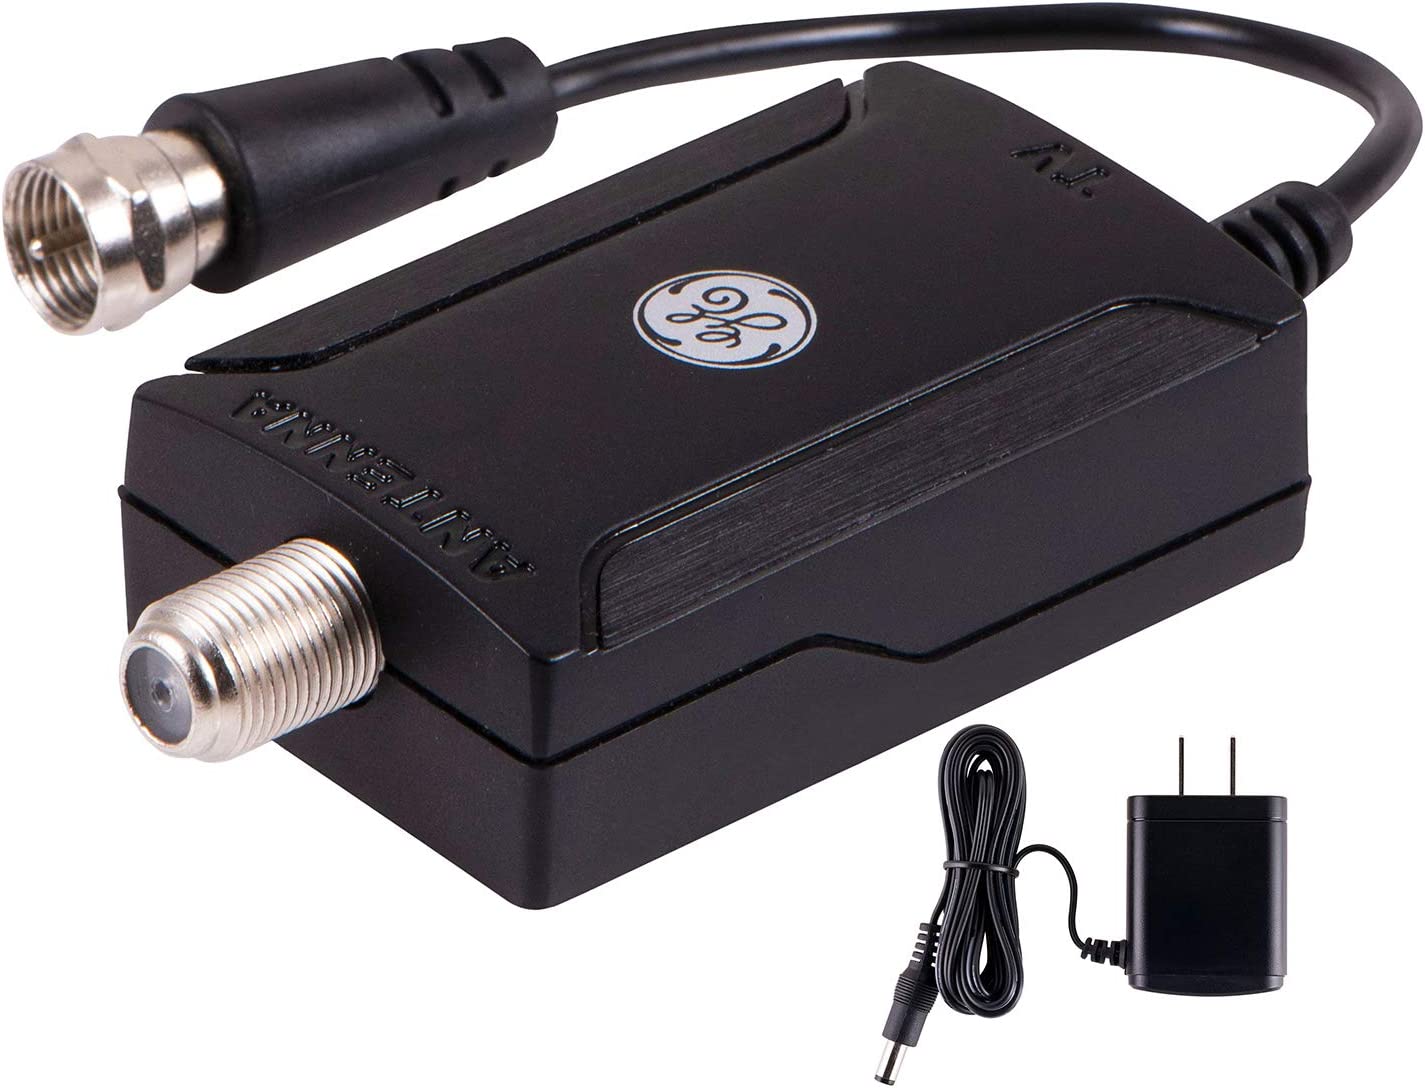 Do you need a TV antenna amplifier? - The Free TV Project